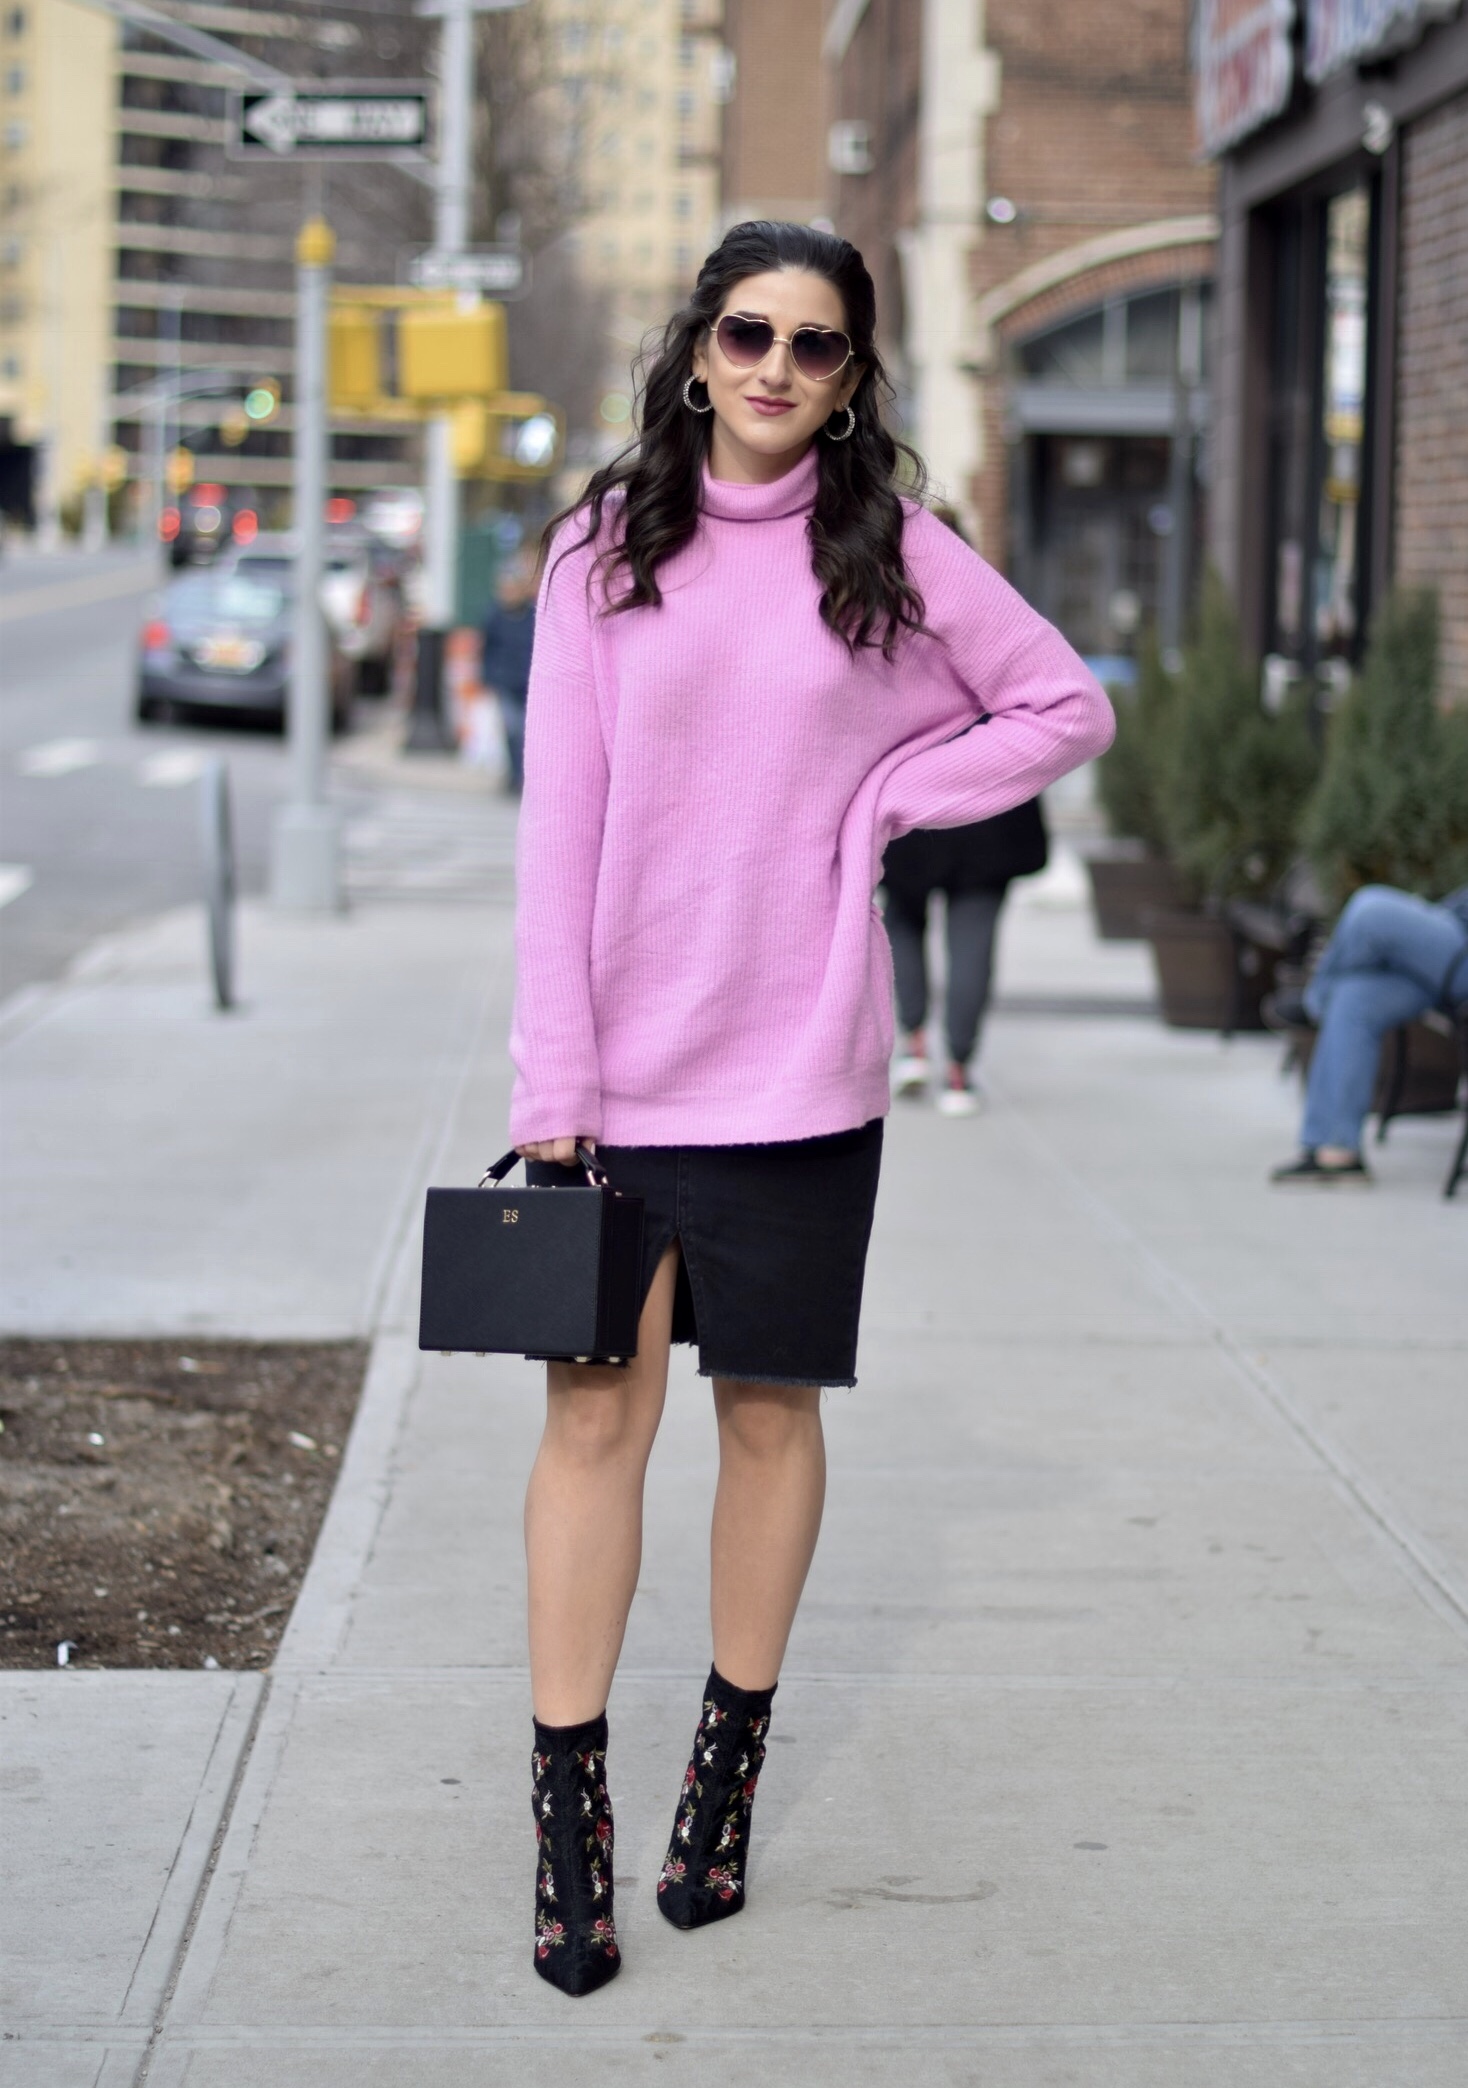 Surviving Winter With ASOS 5 Hardest Parts Of Blogging Esther Santer Fashion Blog NYC Street Style Blogger Outfit OOTD Trendy Pink Sweater Black Denim Skirt Box Bag Floral Booties Betsey Johnson Girl Women Purse Heart Sunglasses Booties Accesories.jpg